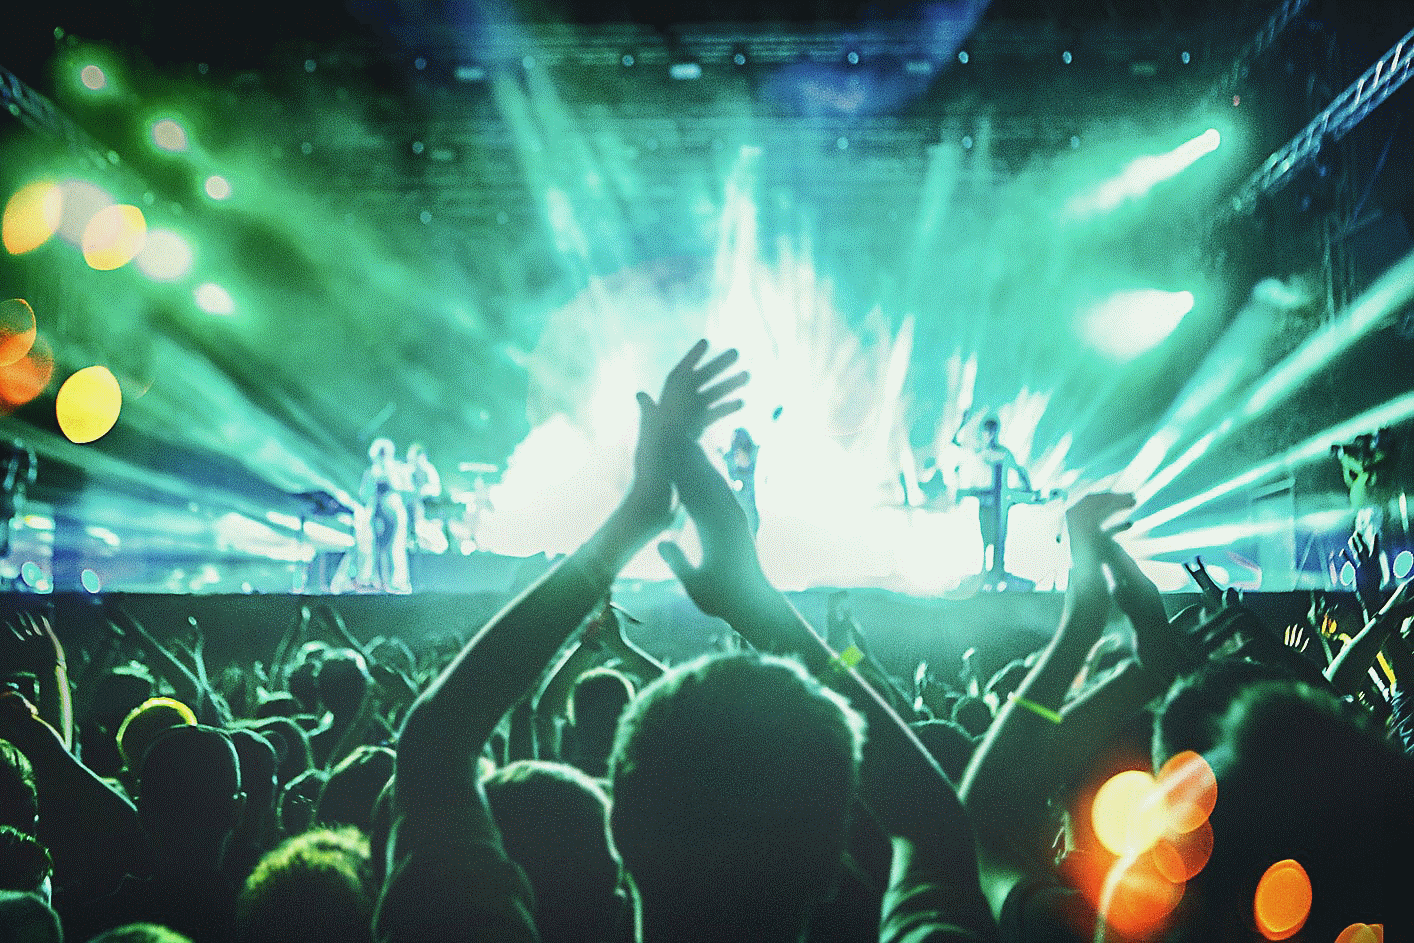 Image of a live music concert with multiple people clapping and blue and green lighting